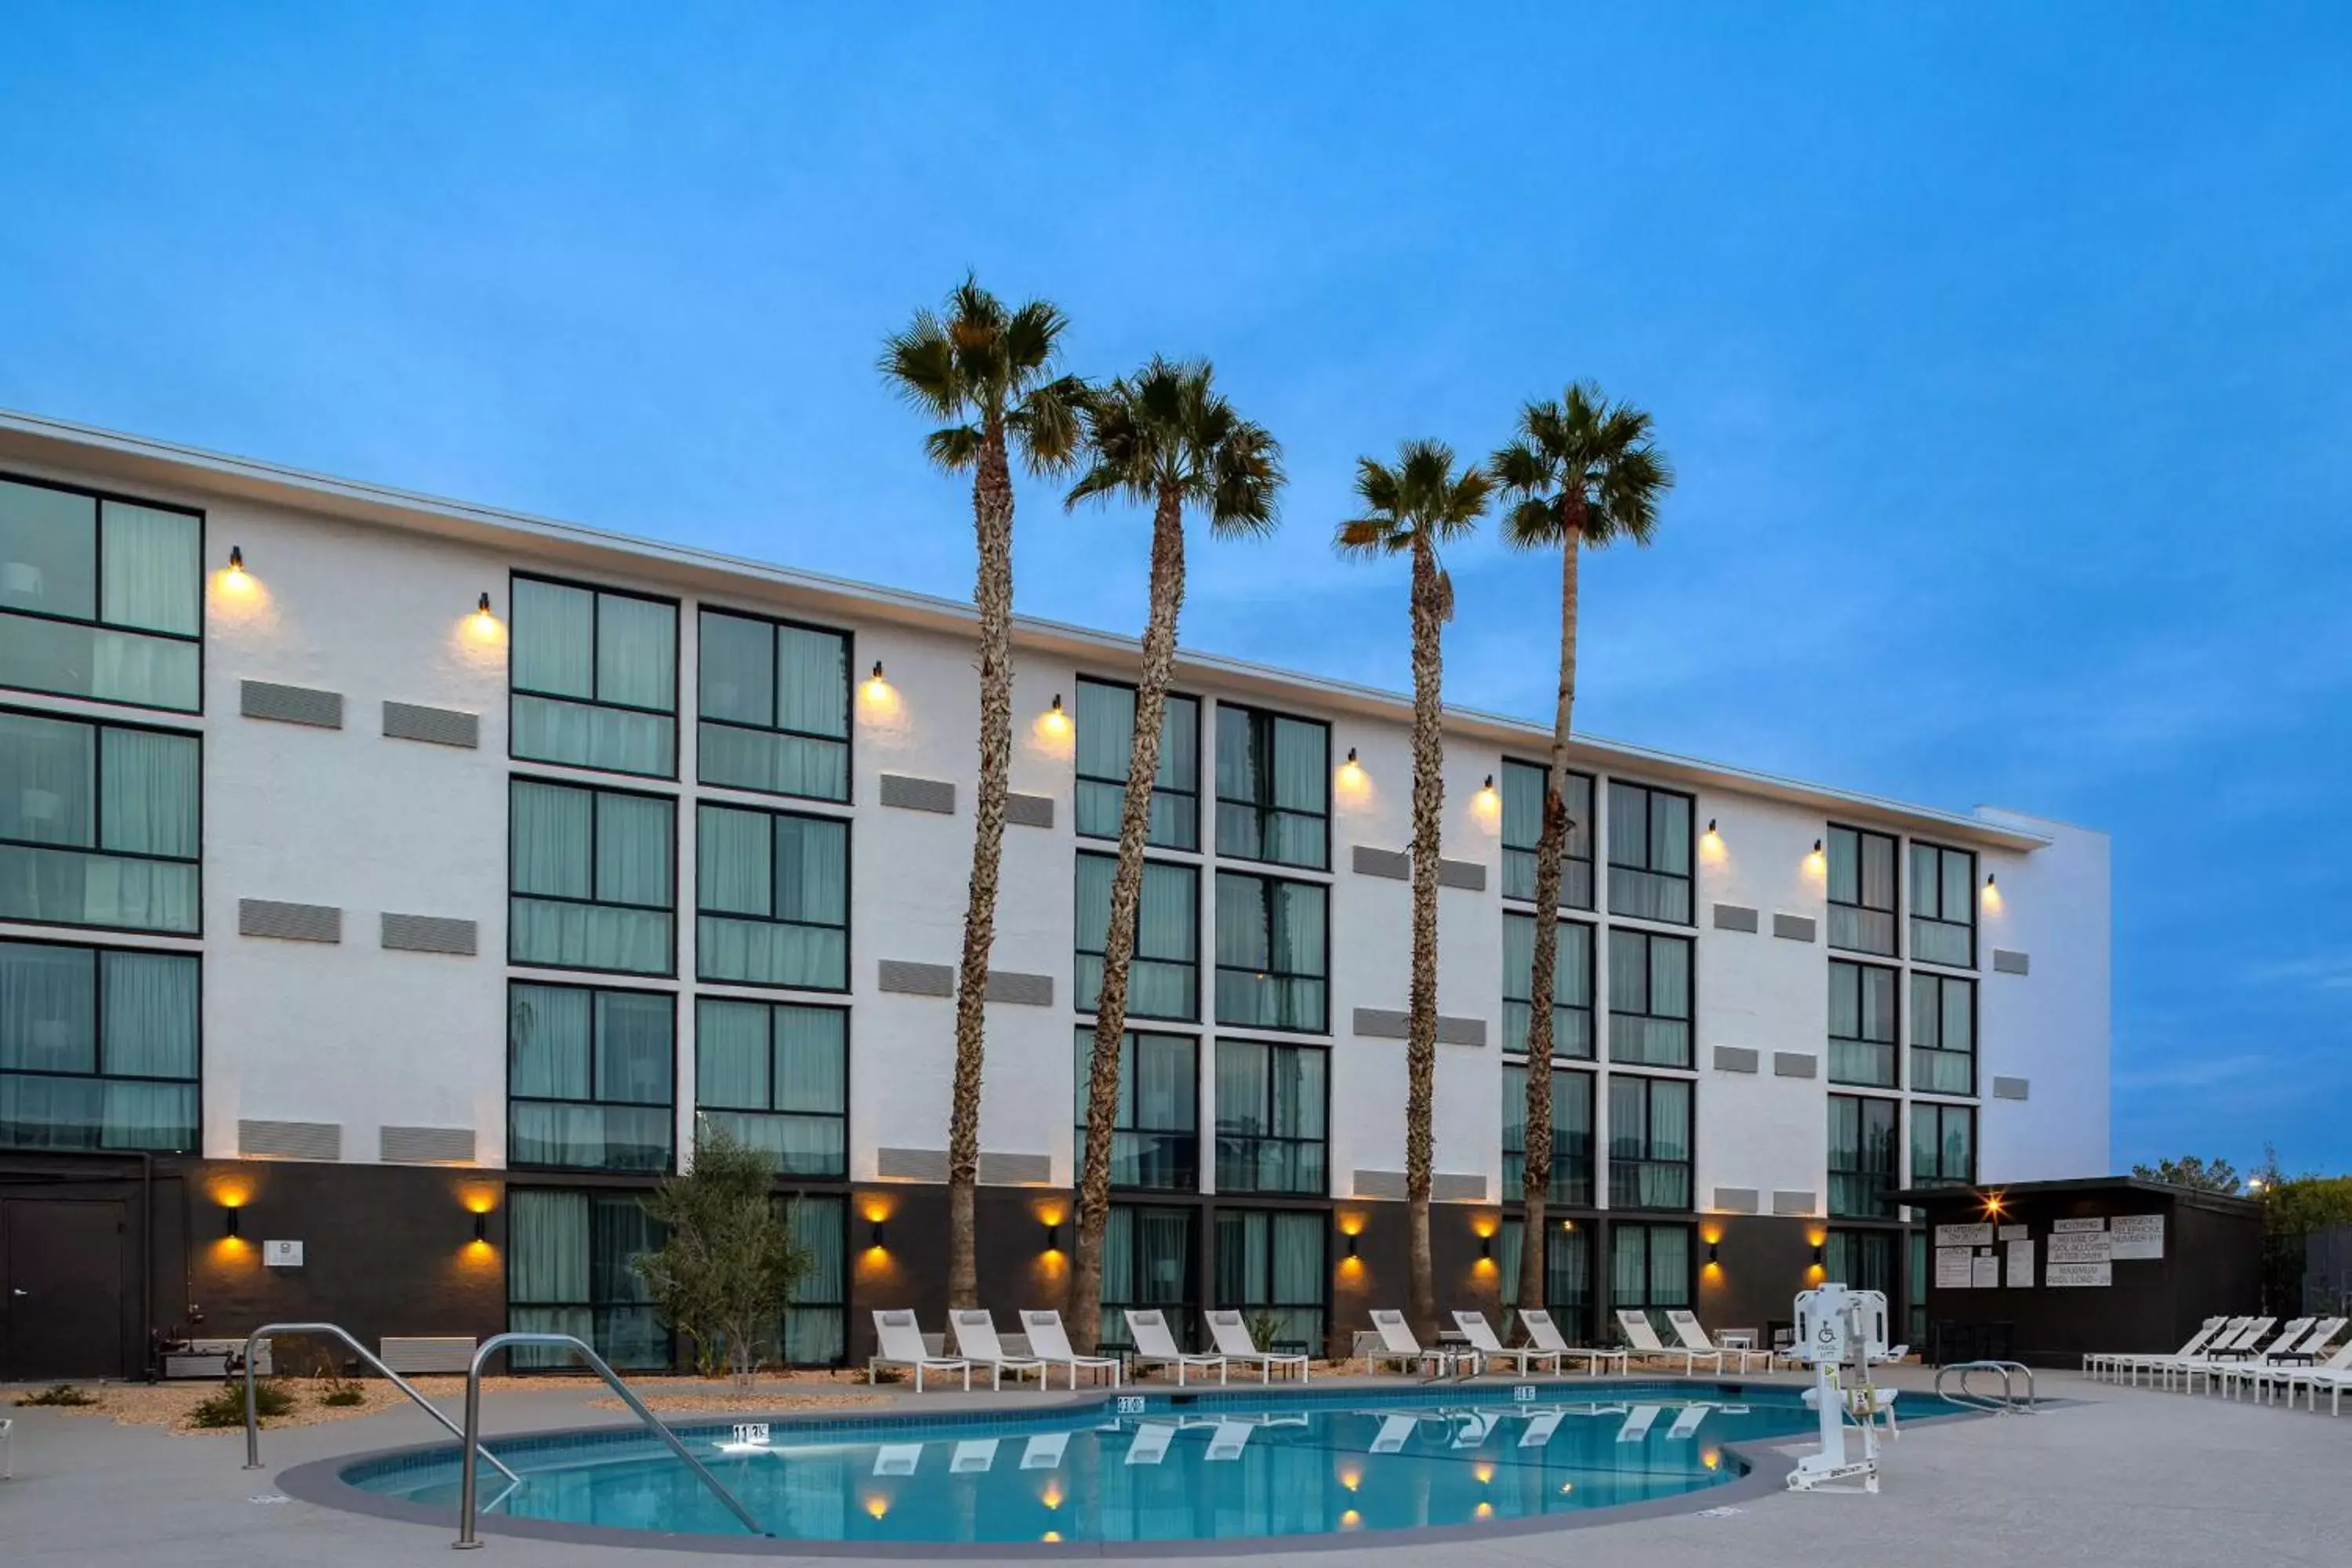 Property Building in Doubletree By Hilton Palmdale, Ca